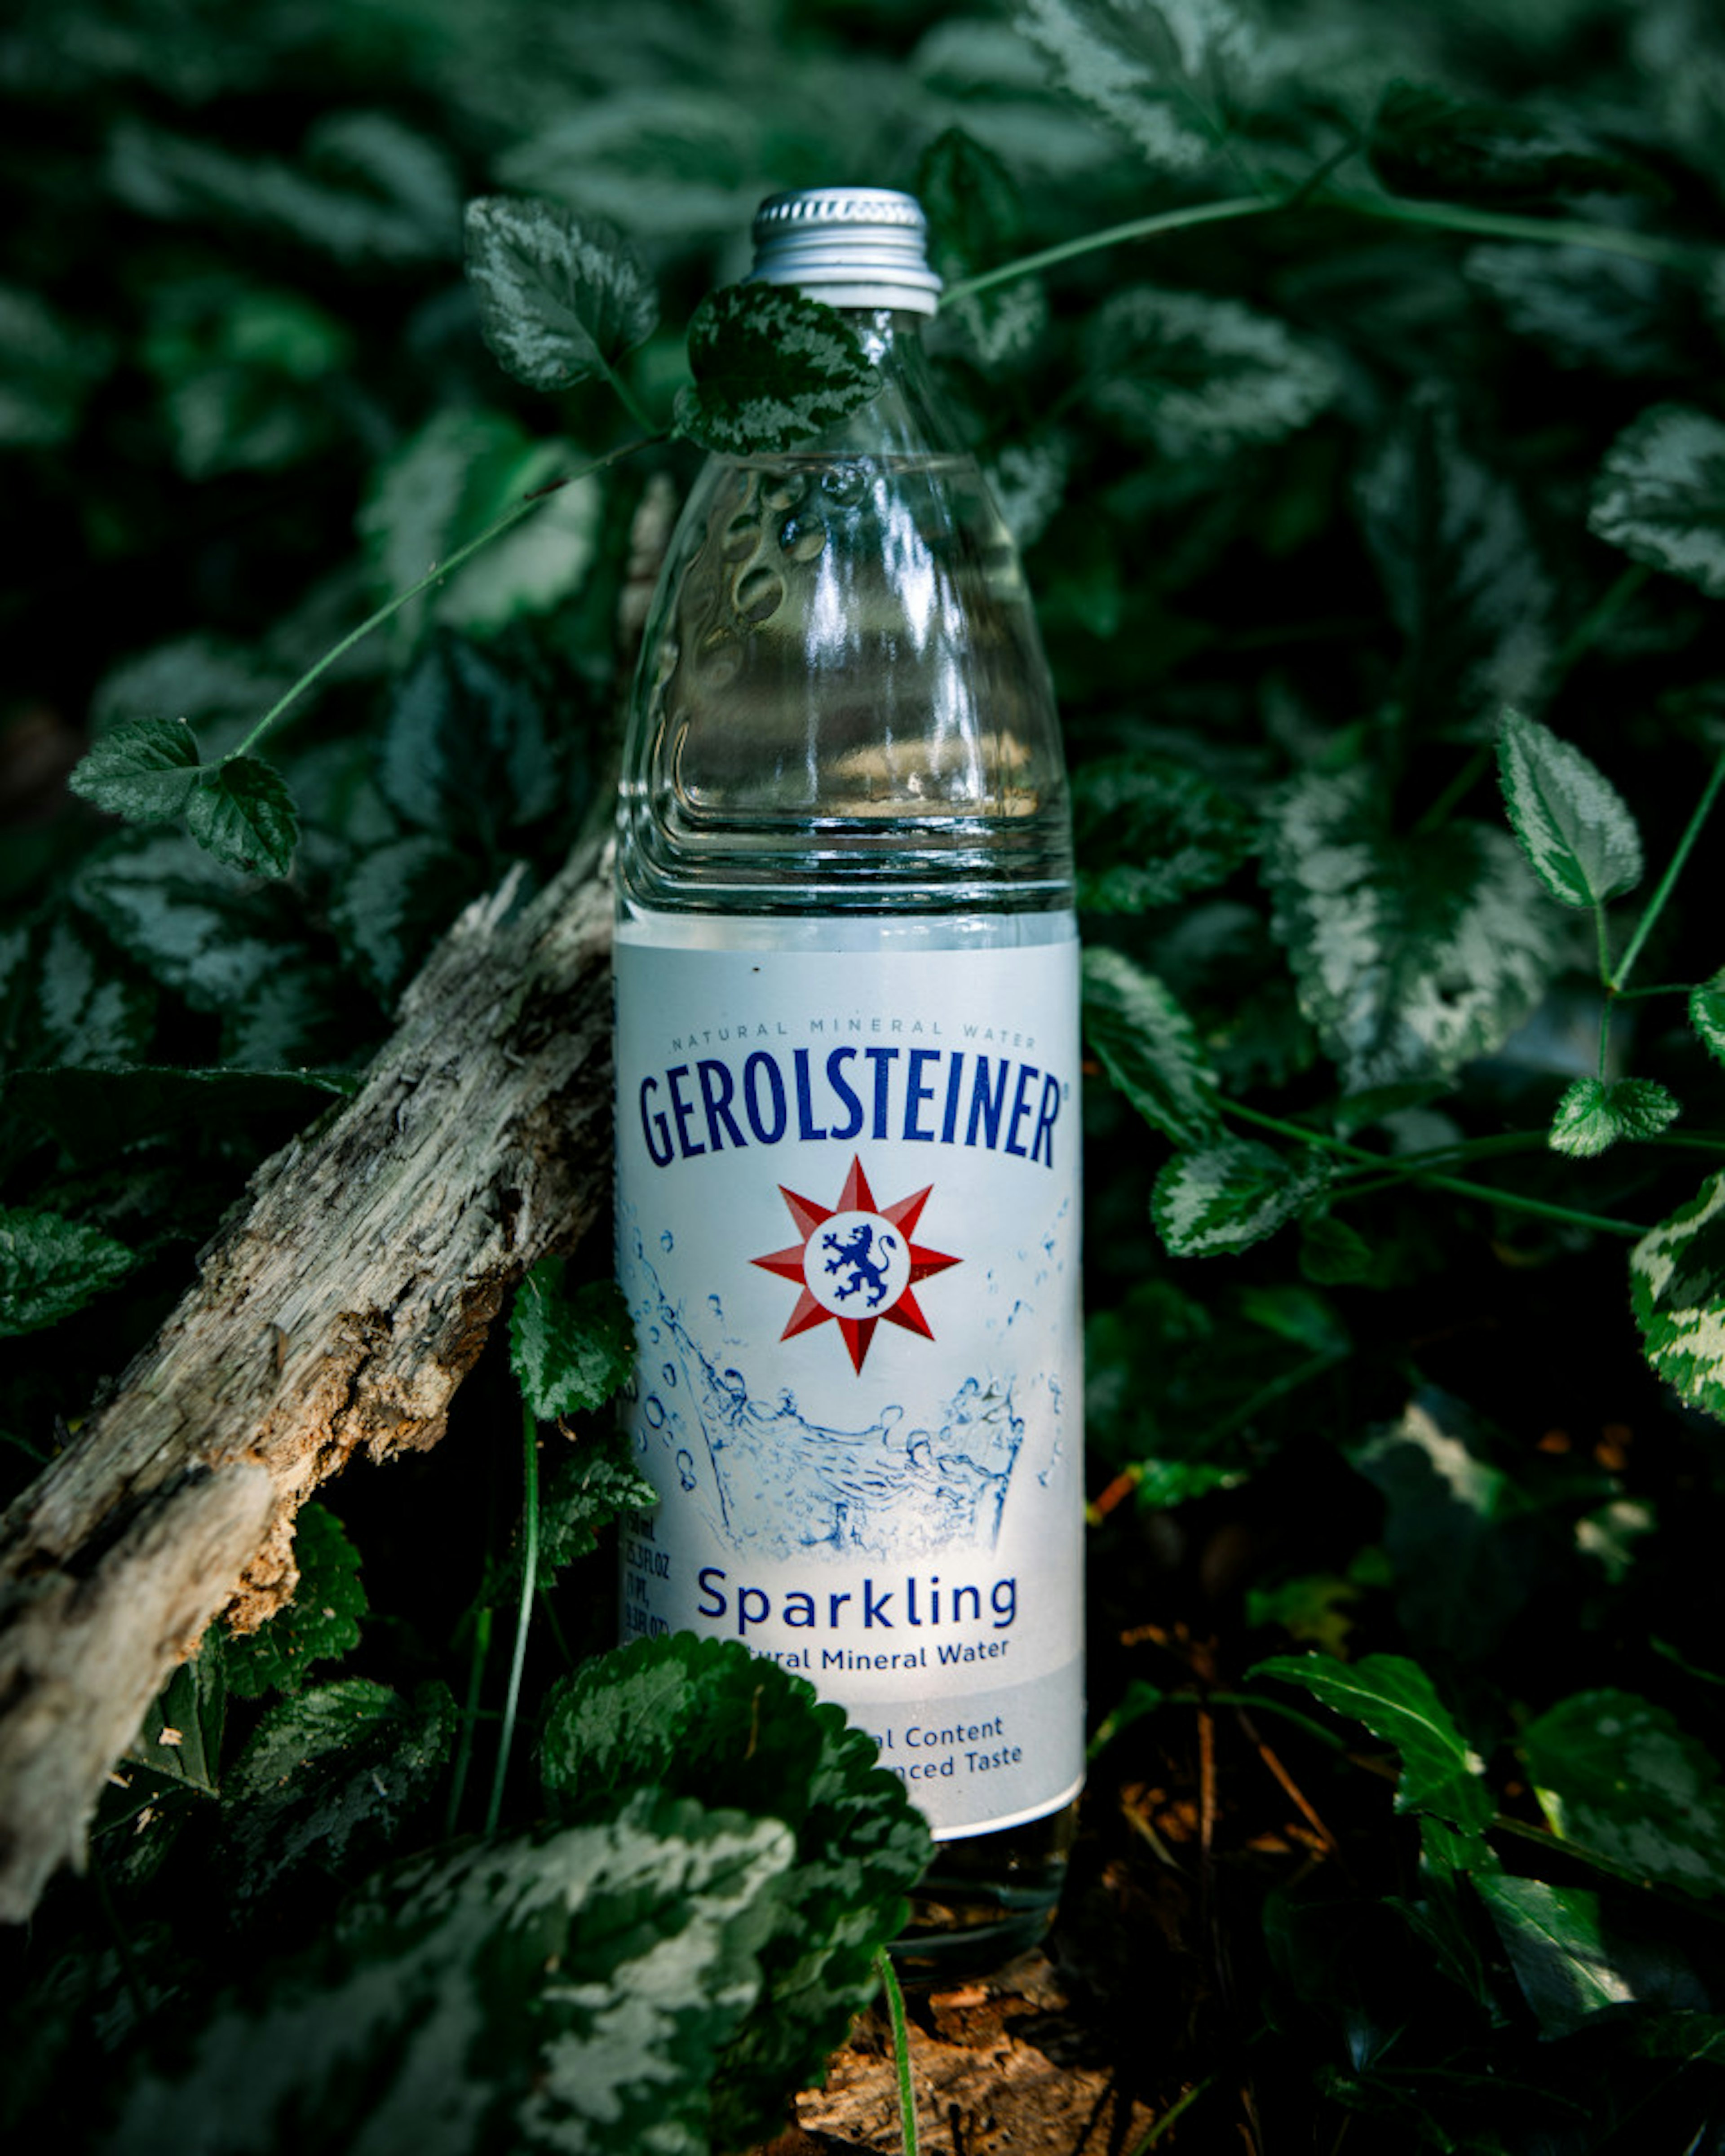 Gerolsteiner bottle surrounded by green plants outdoors. 